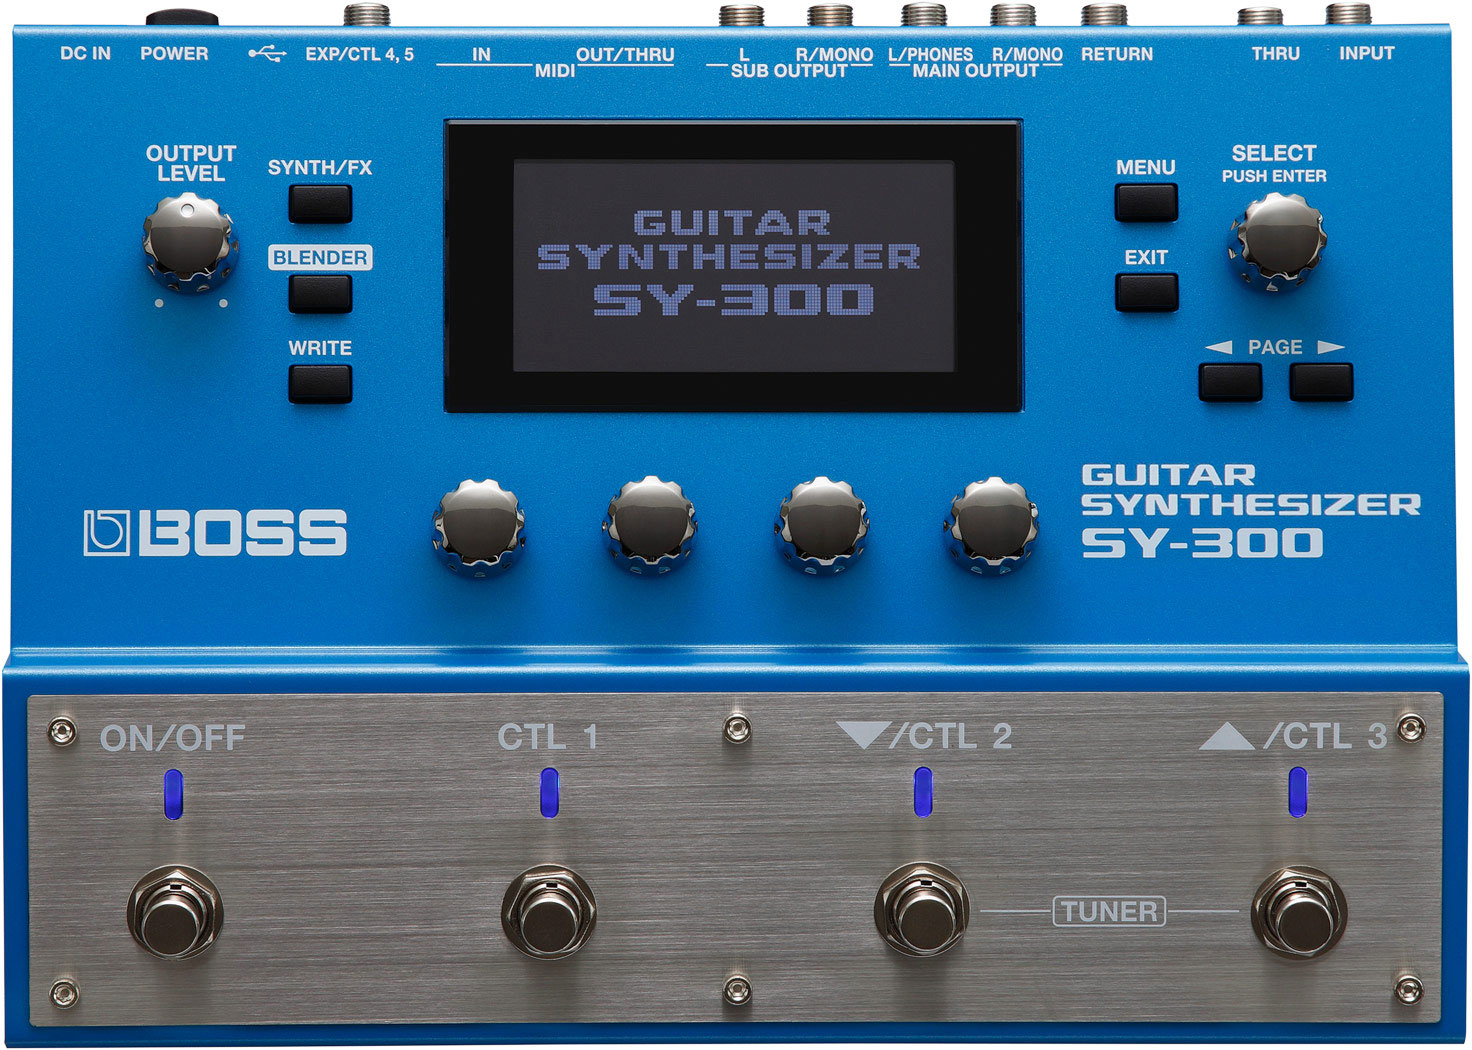 BOSS SY-300 EFFET SYNTHETISEUR GUITARE